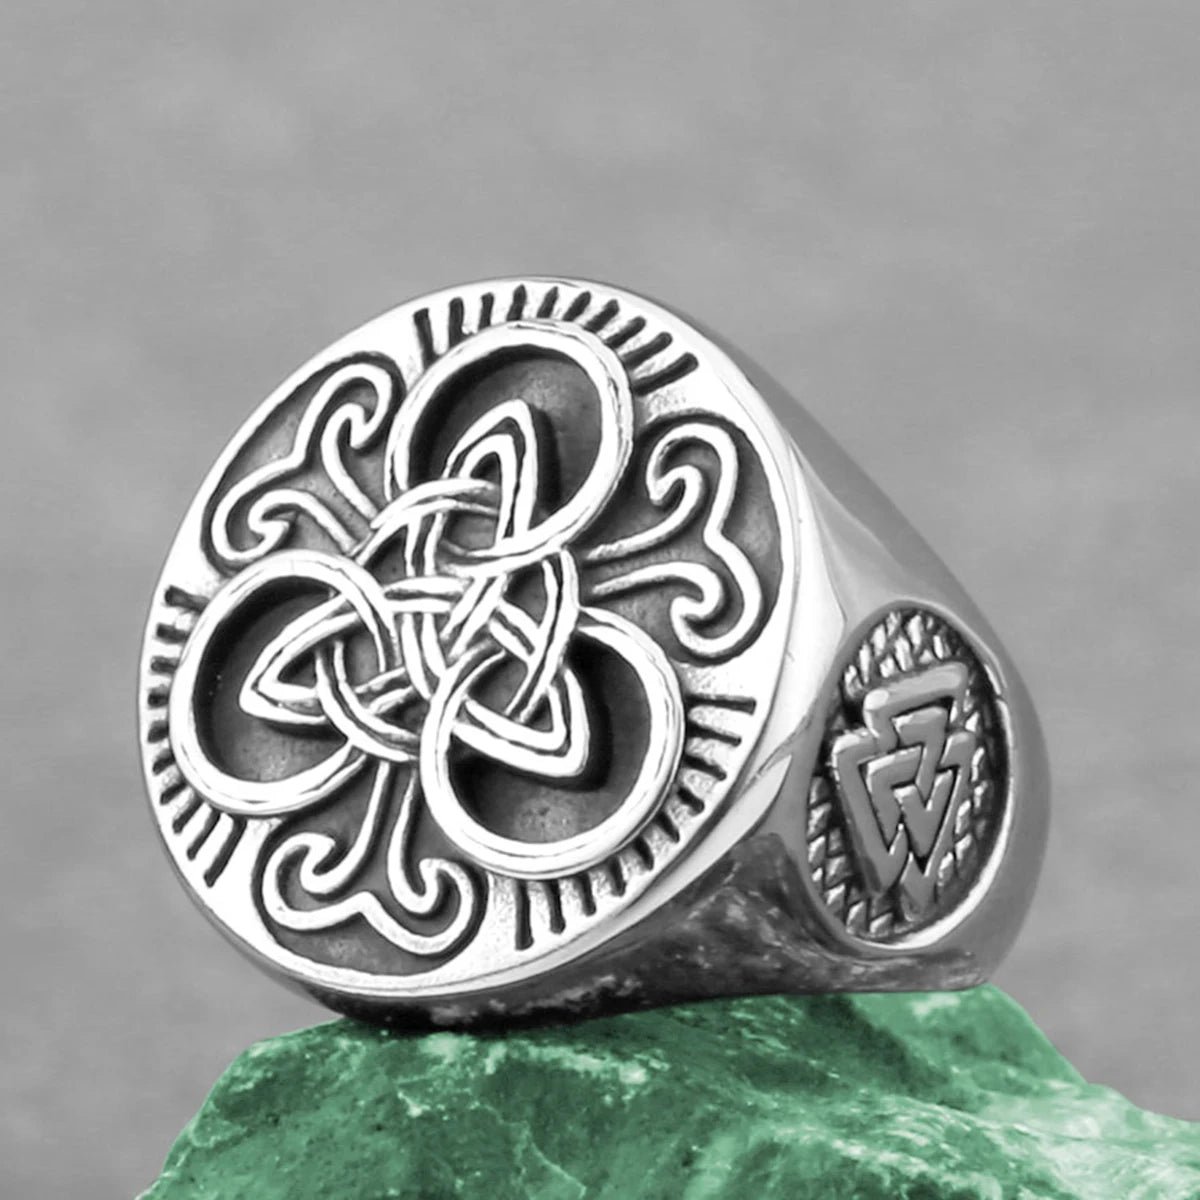 Nordic Viking Stainless Steel Ring - Anchor Compass Tree of Life Rune Amulet Wolf Finger Jewelry VK-11 Men's Rings